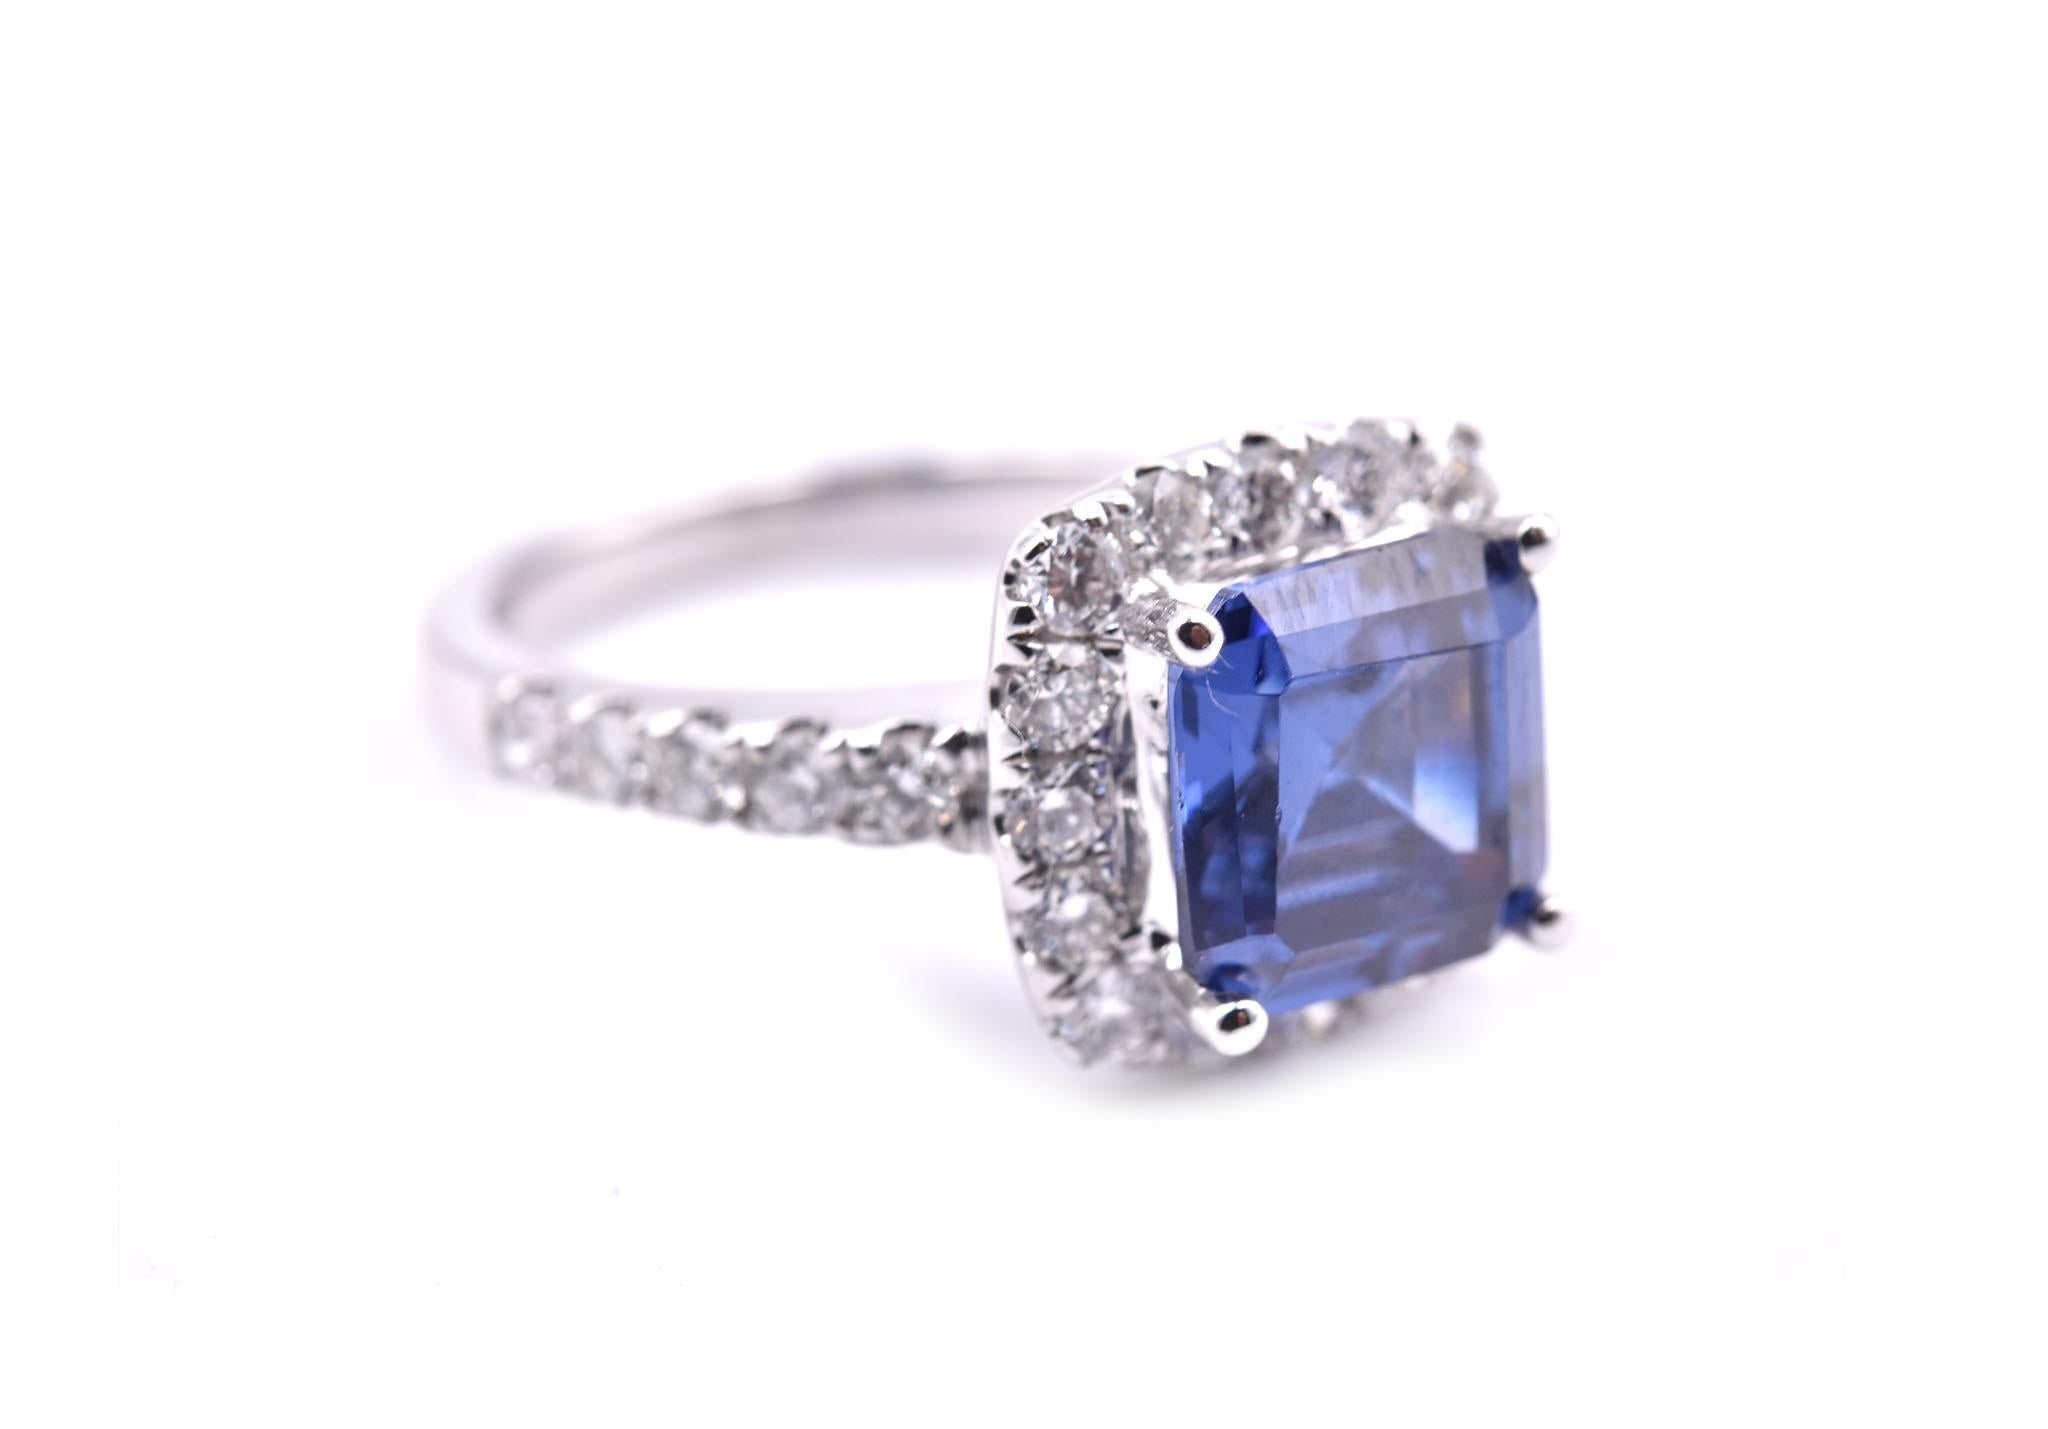 Designer: custom design
Material: 18k white gold 
Tanzanite: 1 round radiant cut= 4.30ct
Diamonds: 26 round brilliant cut= .81cttw
Color: G	
Clarity: VS
Ring Size: 6 ½ (please allow two additional shipping days for sizing requests)
Dimensions: ring